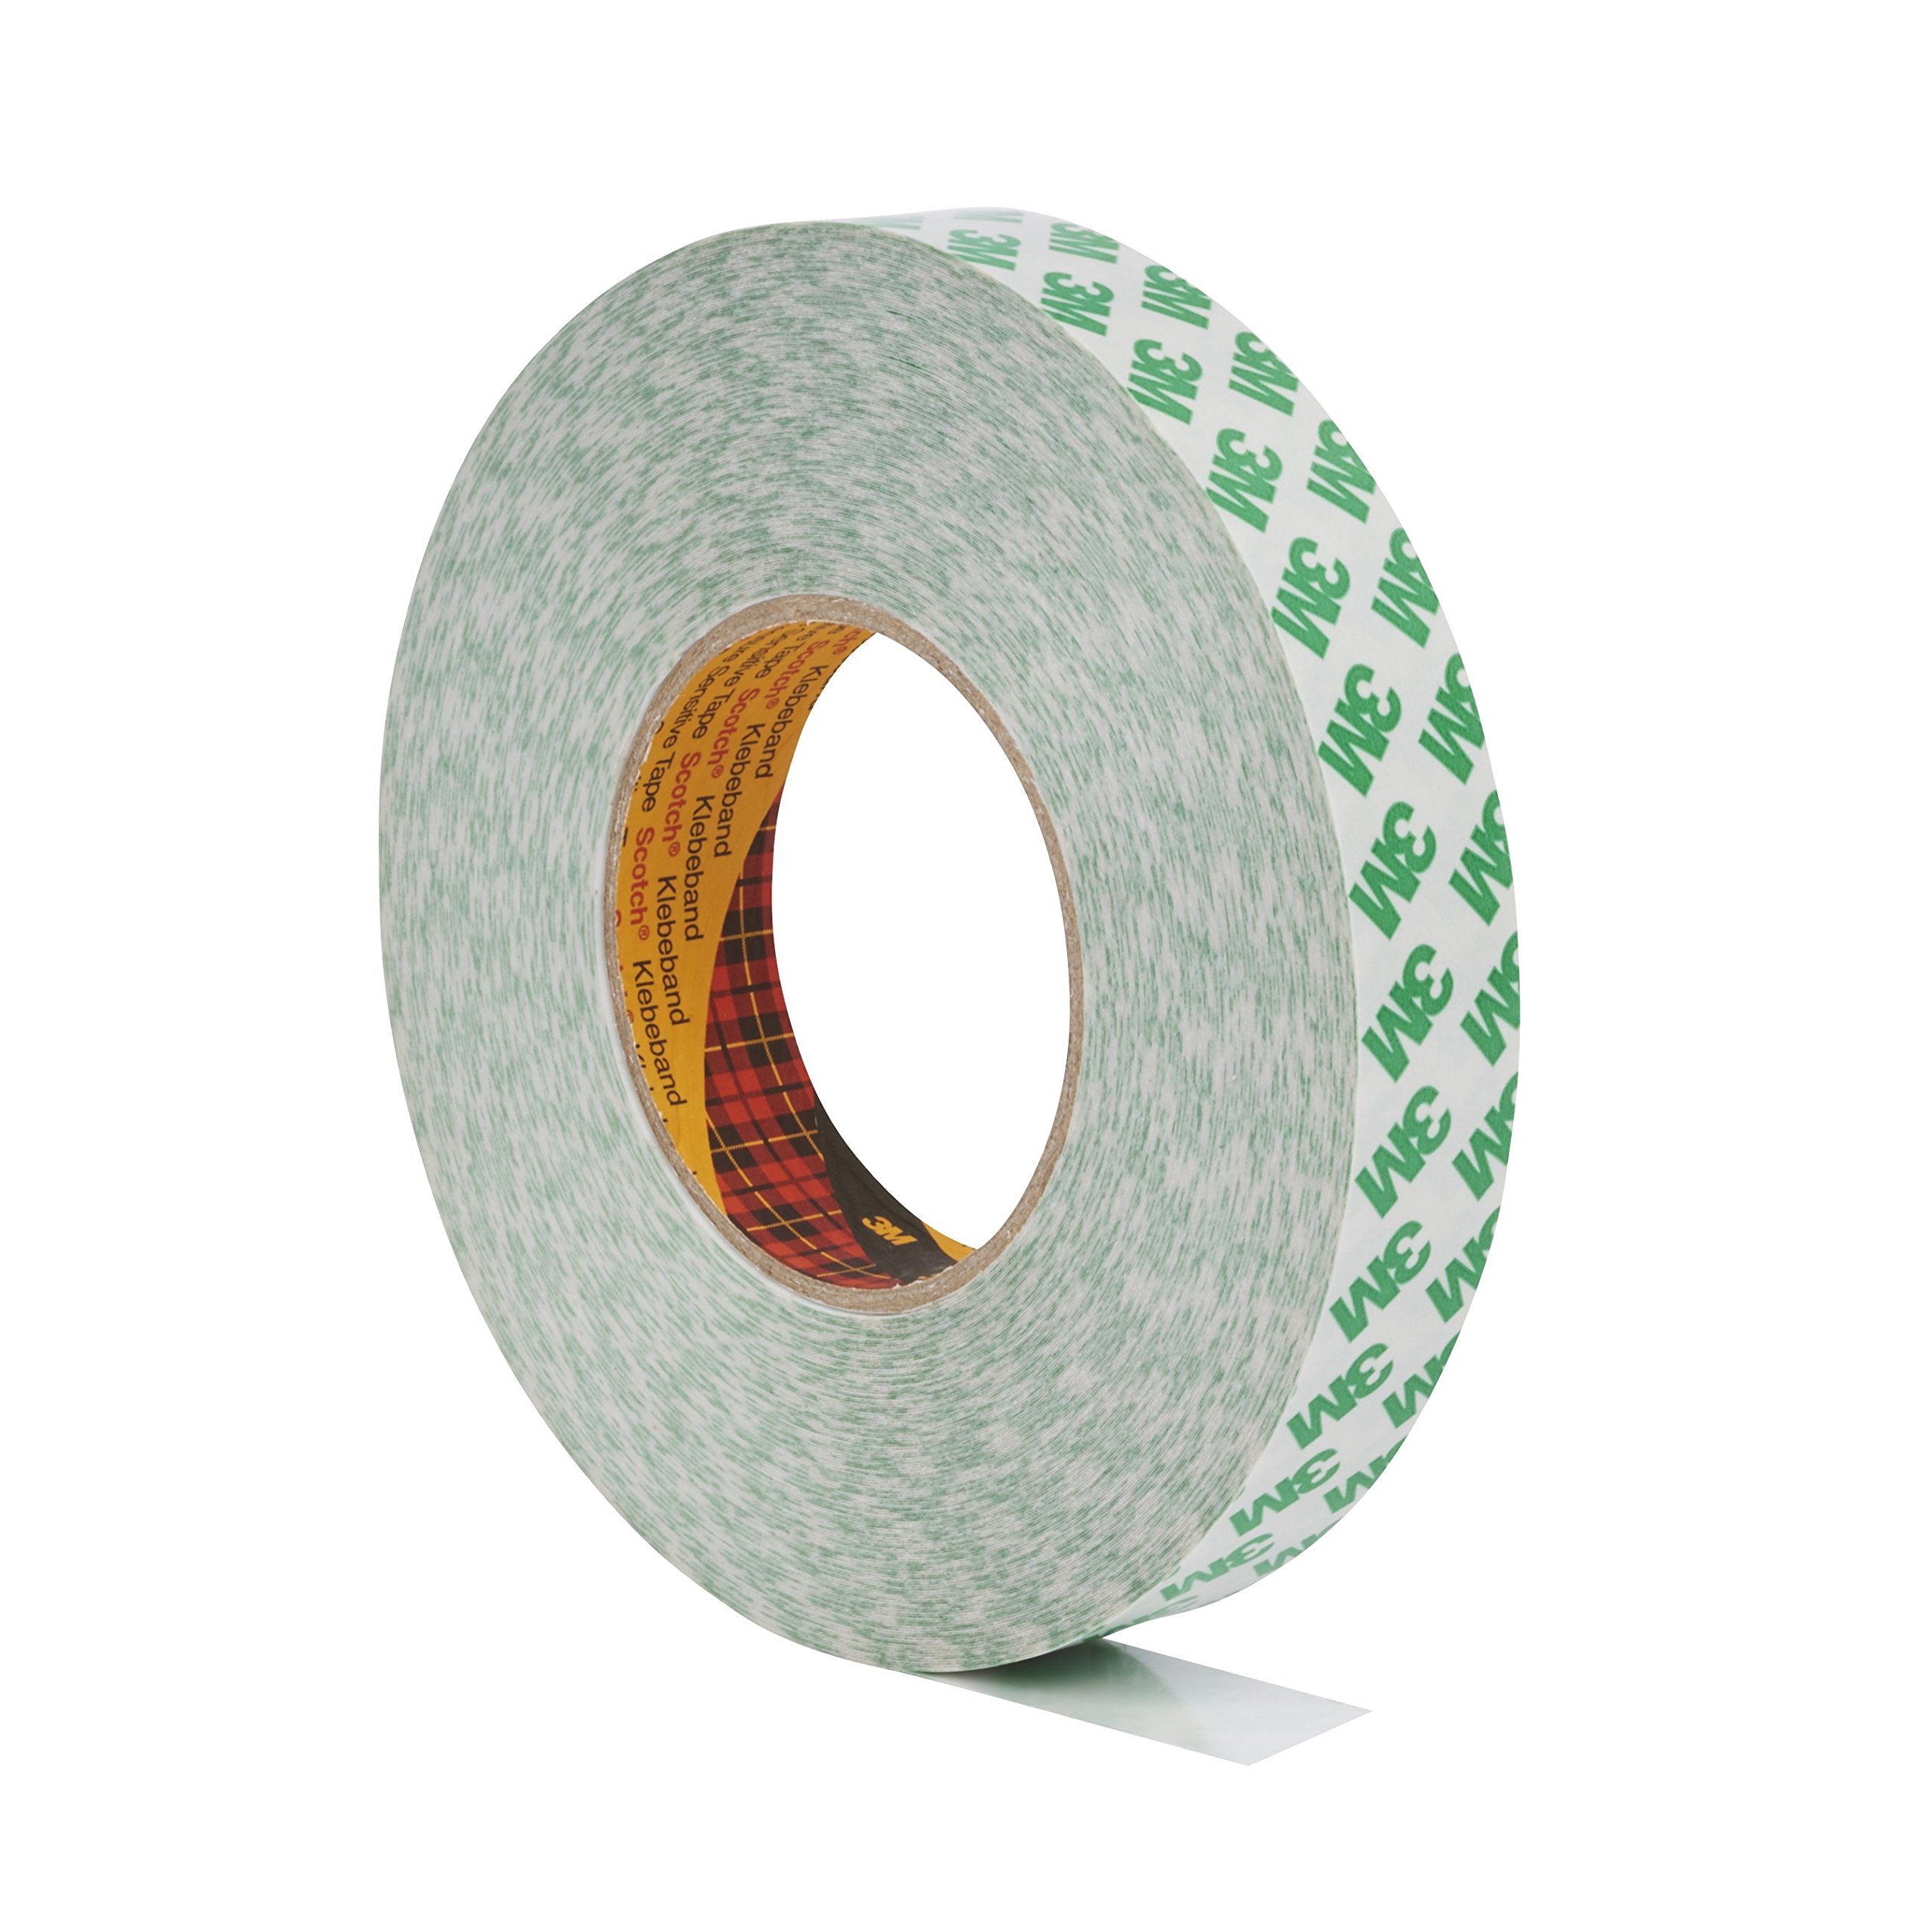 3M™ 9087 Double Coated Tape 6mm x 50m